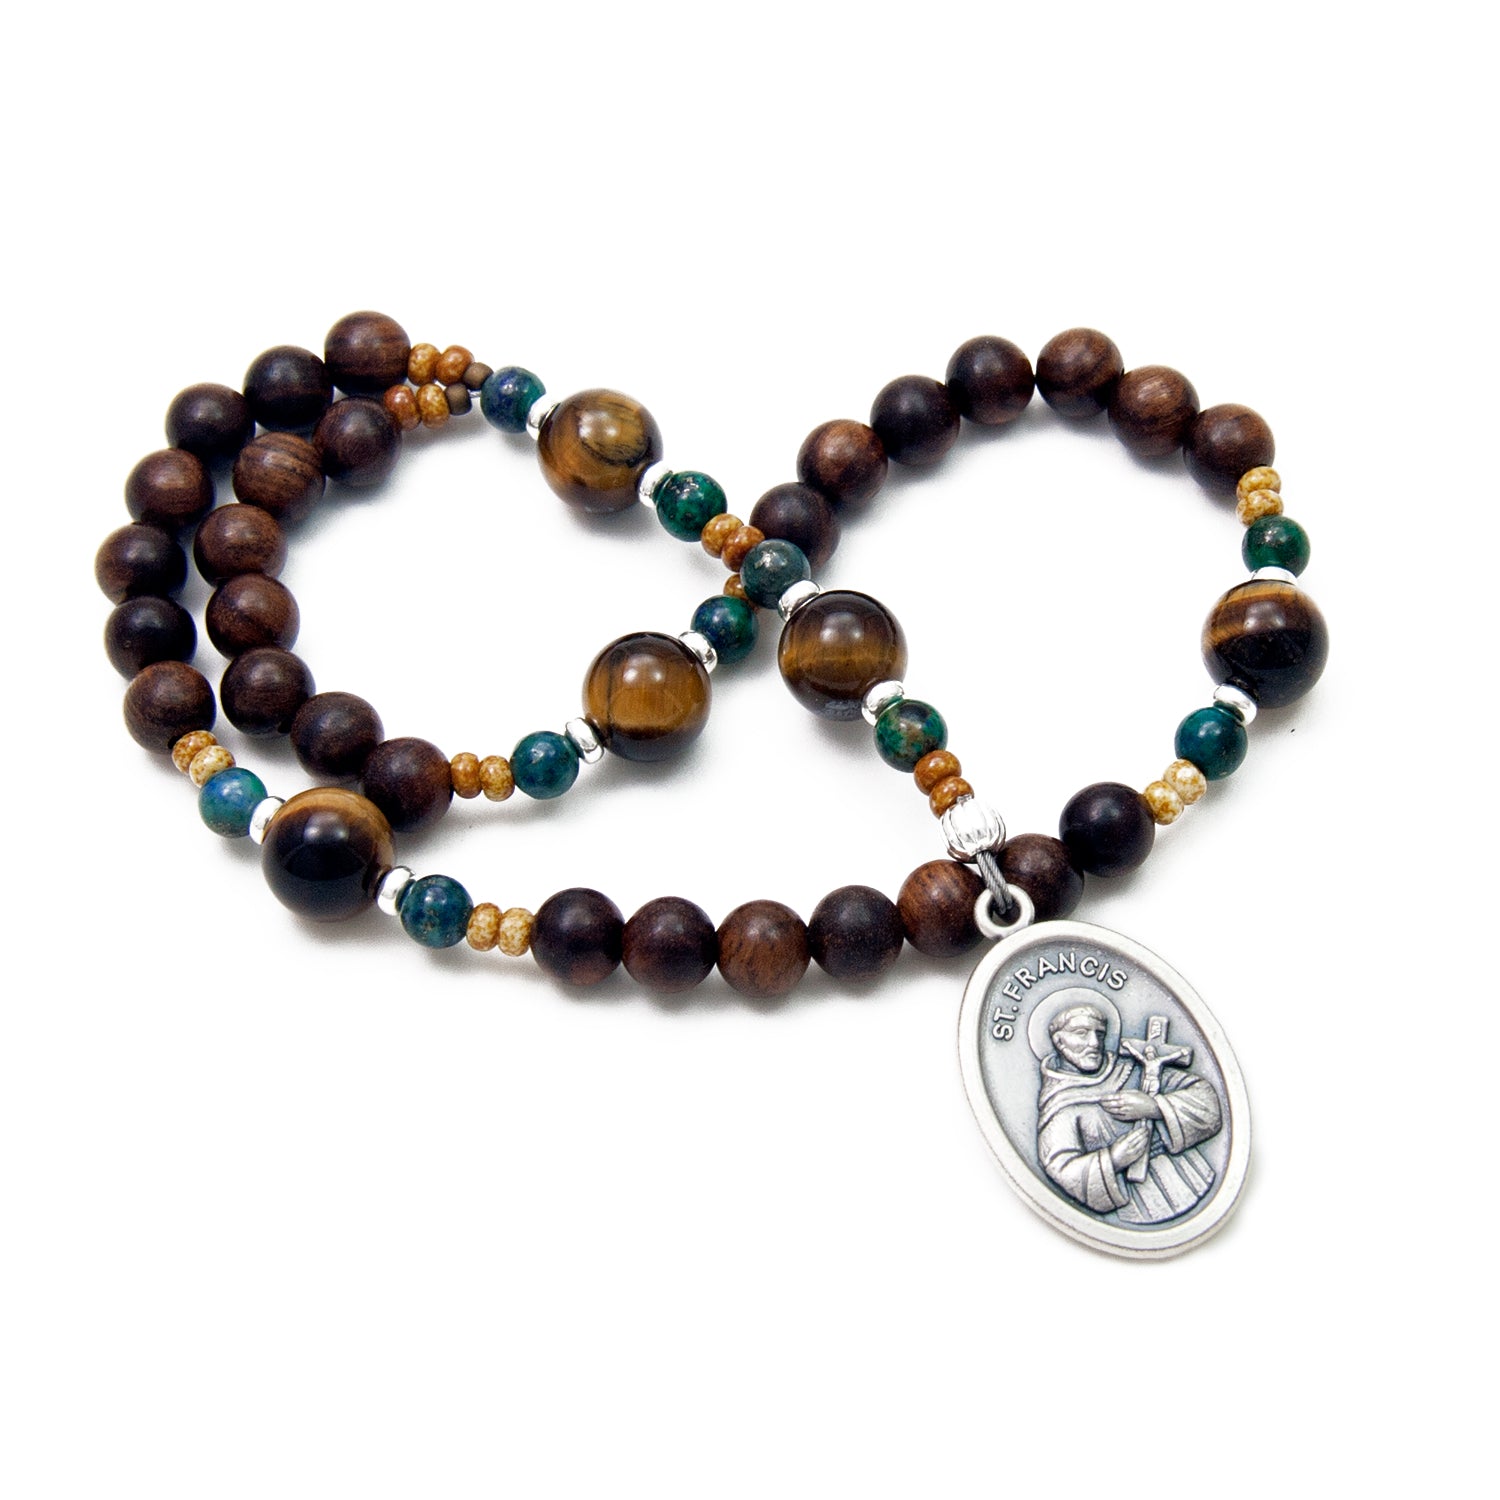 St. Francis of Assisi Anglican Rosary